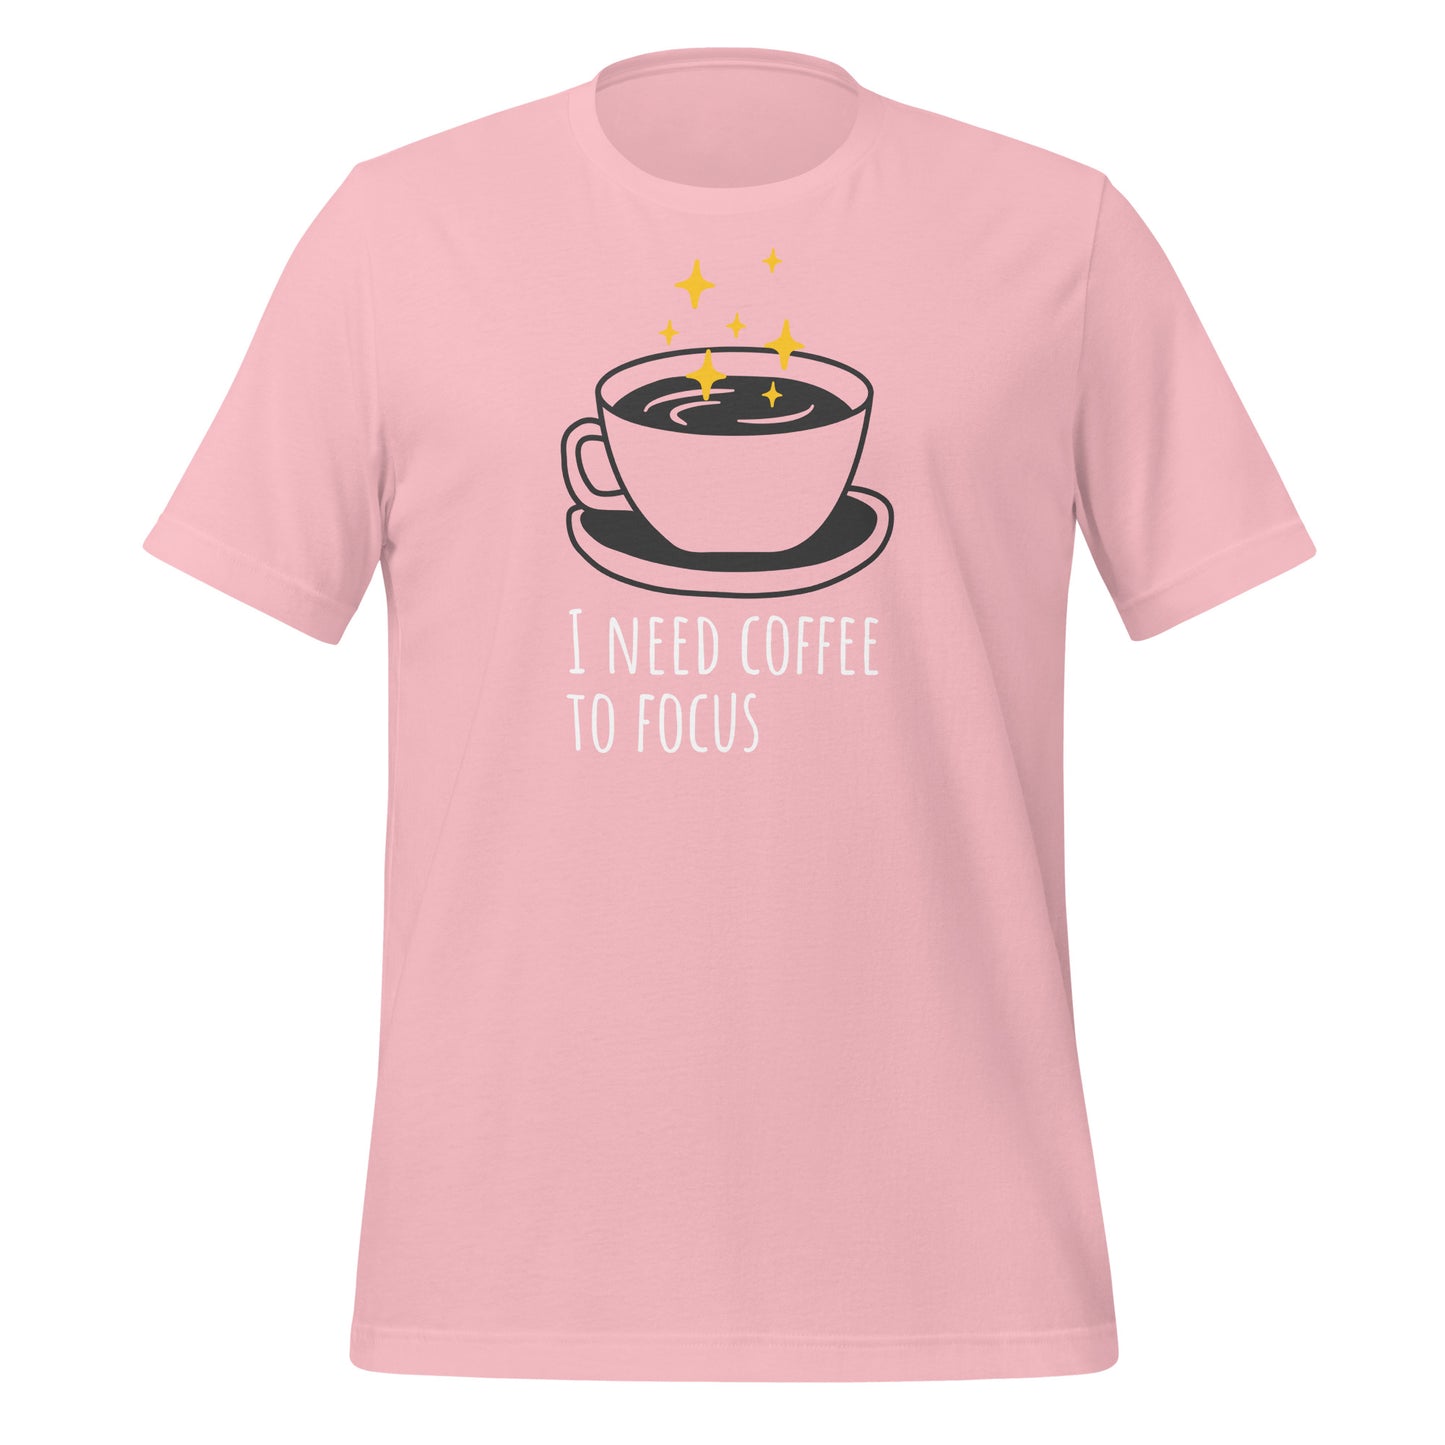 I Need Coffee to Focus T-Shirt: Stay Alert and Productive with Our Stylish Tee!